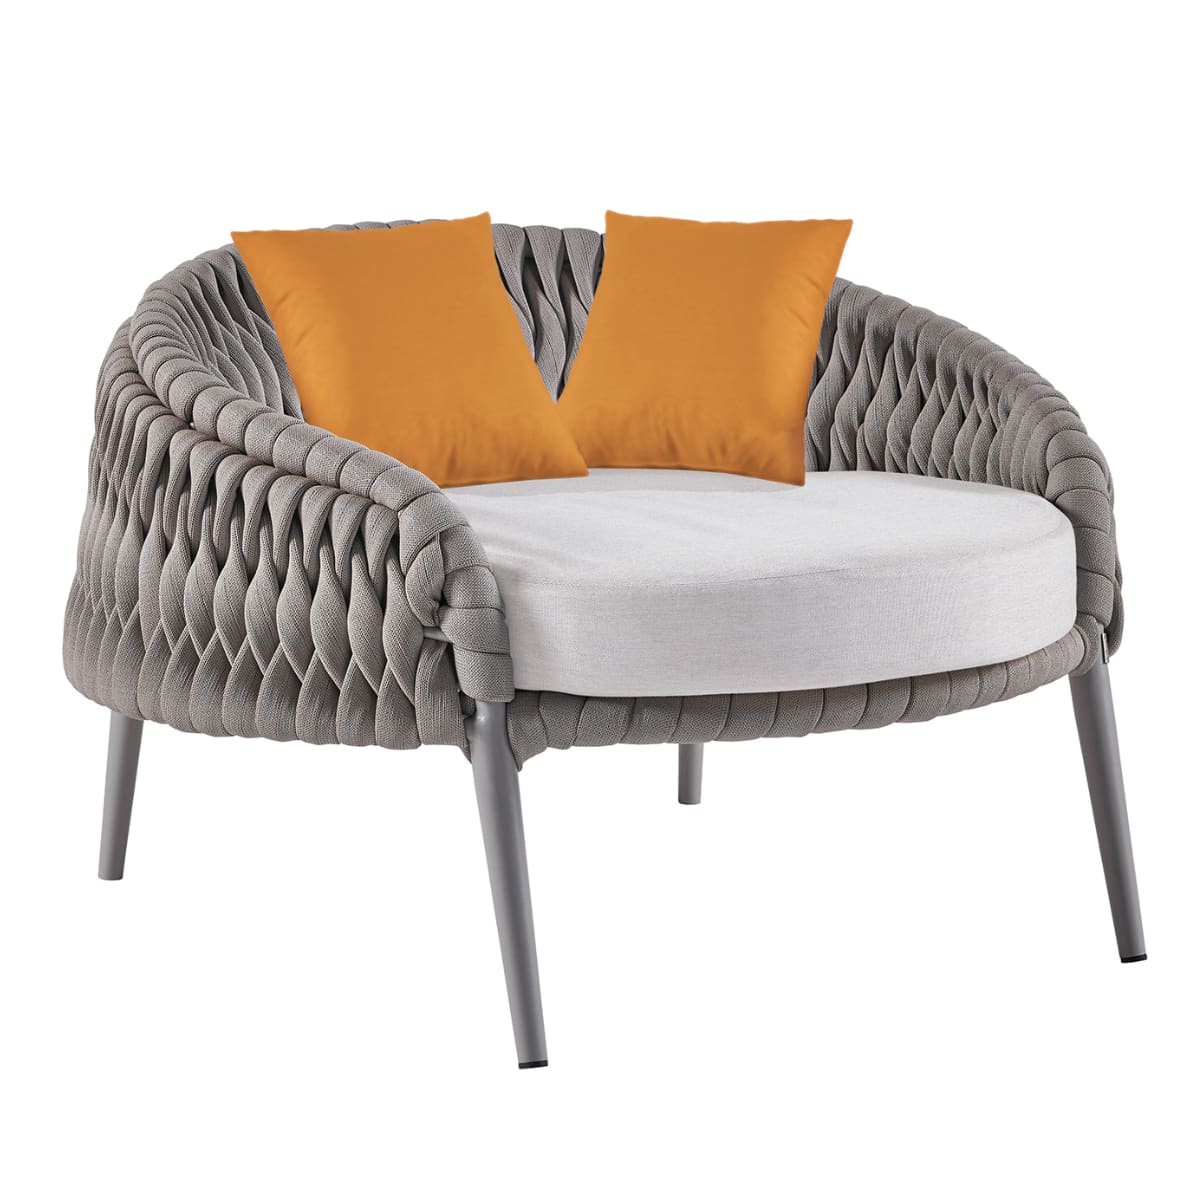 Sifas Kalife Round Lounge Chair